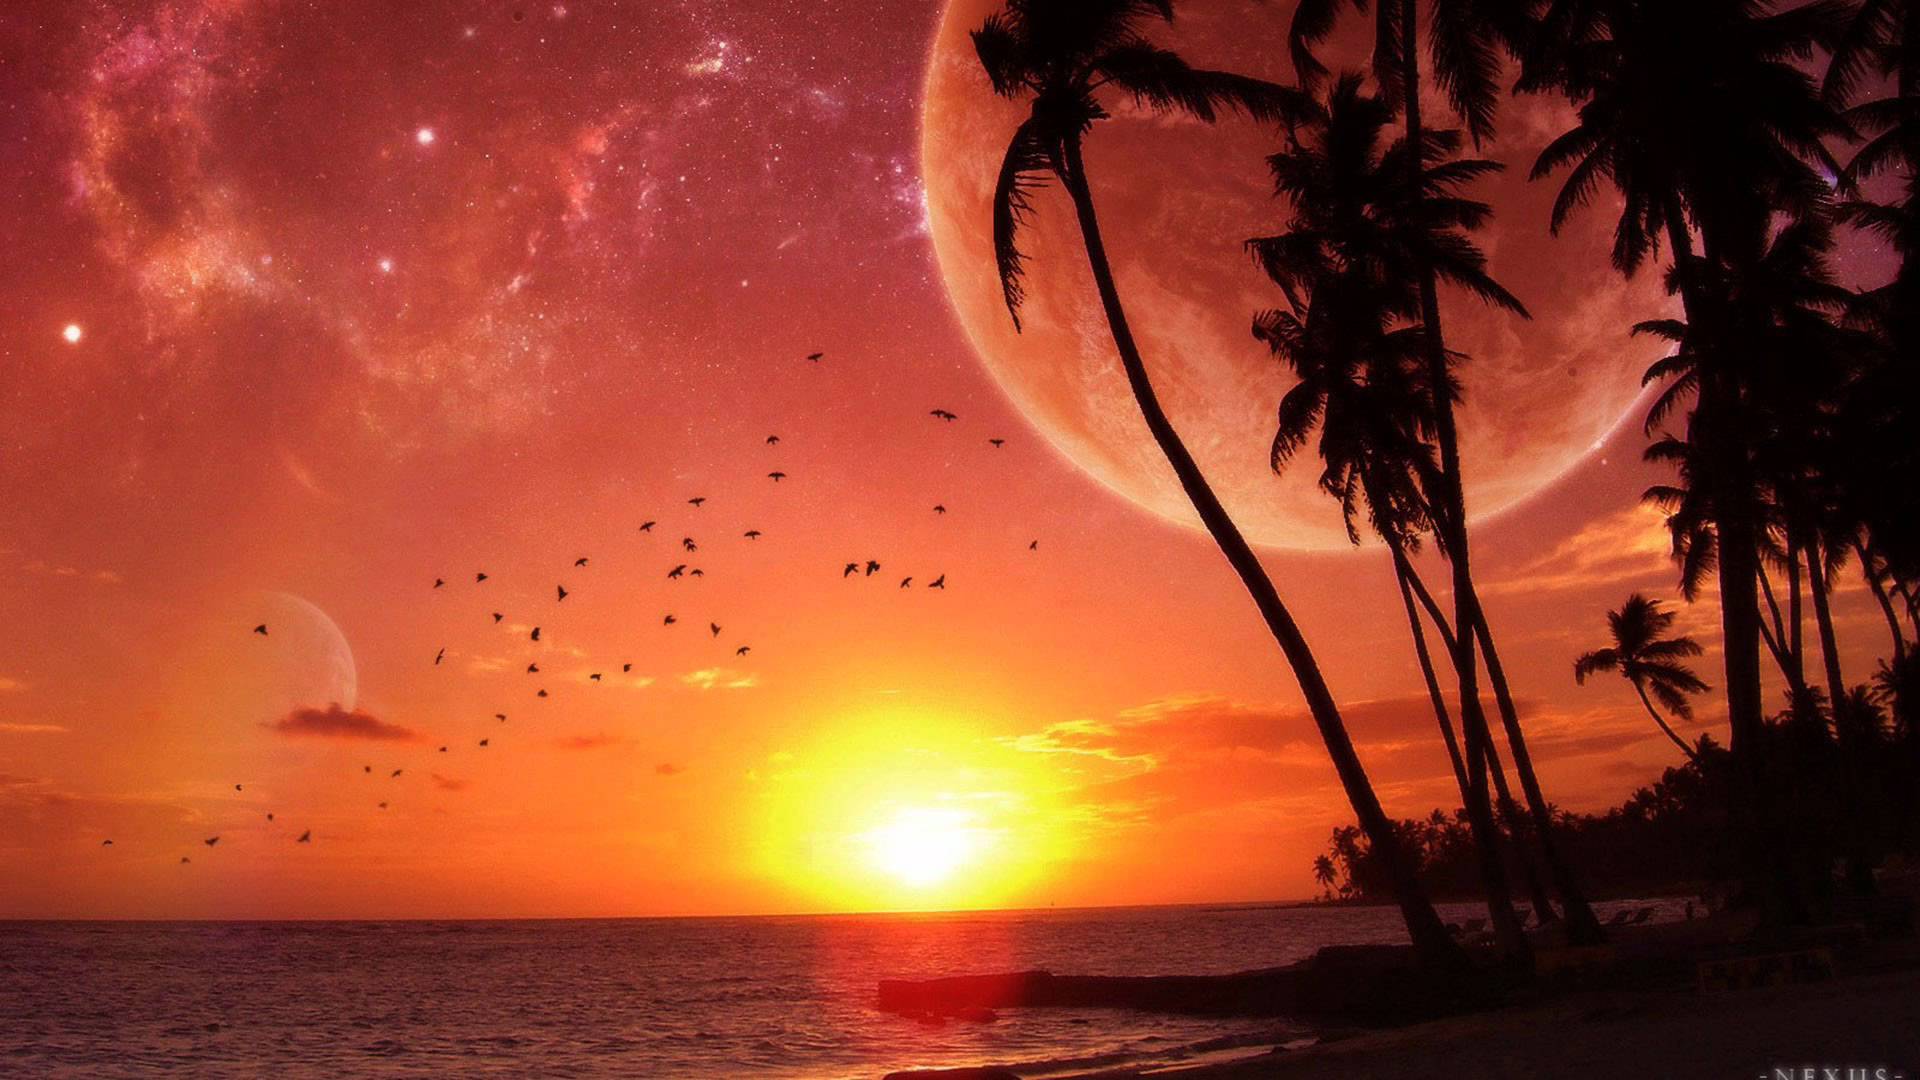 Tropical Sunset Wallpapers For Pc & Mac, Tablet, Laptop, - Nature Wallpapers For Mobile Screen , HD Wallpaper & Backgrounds